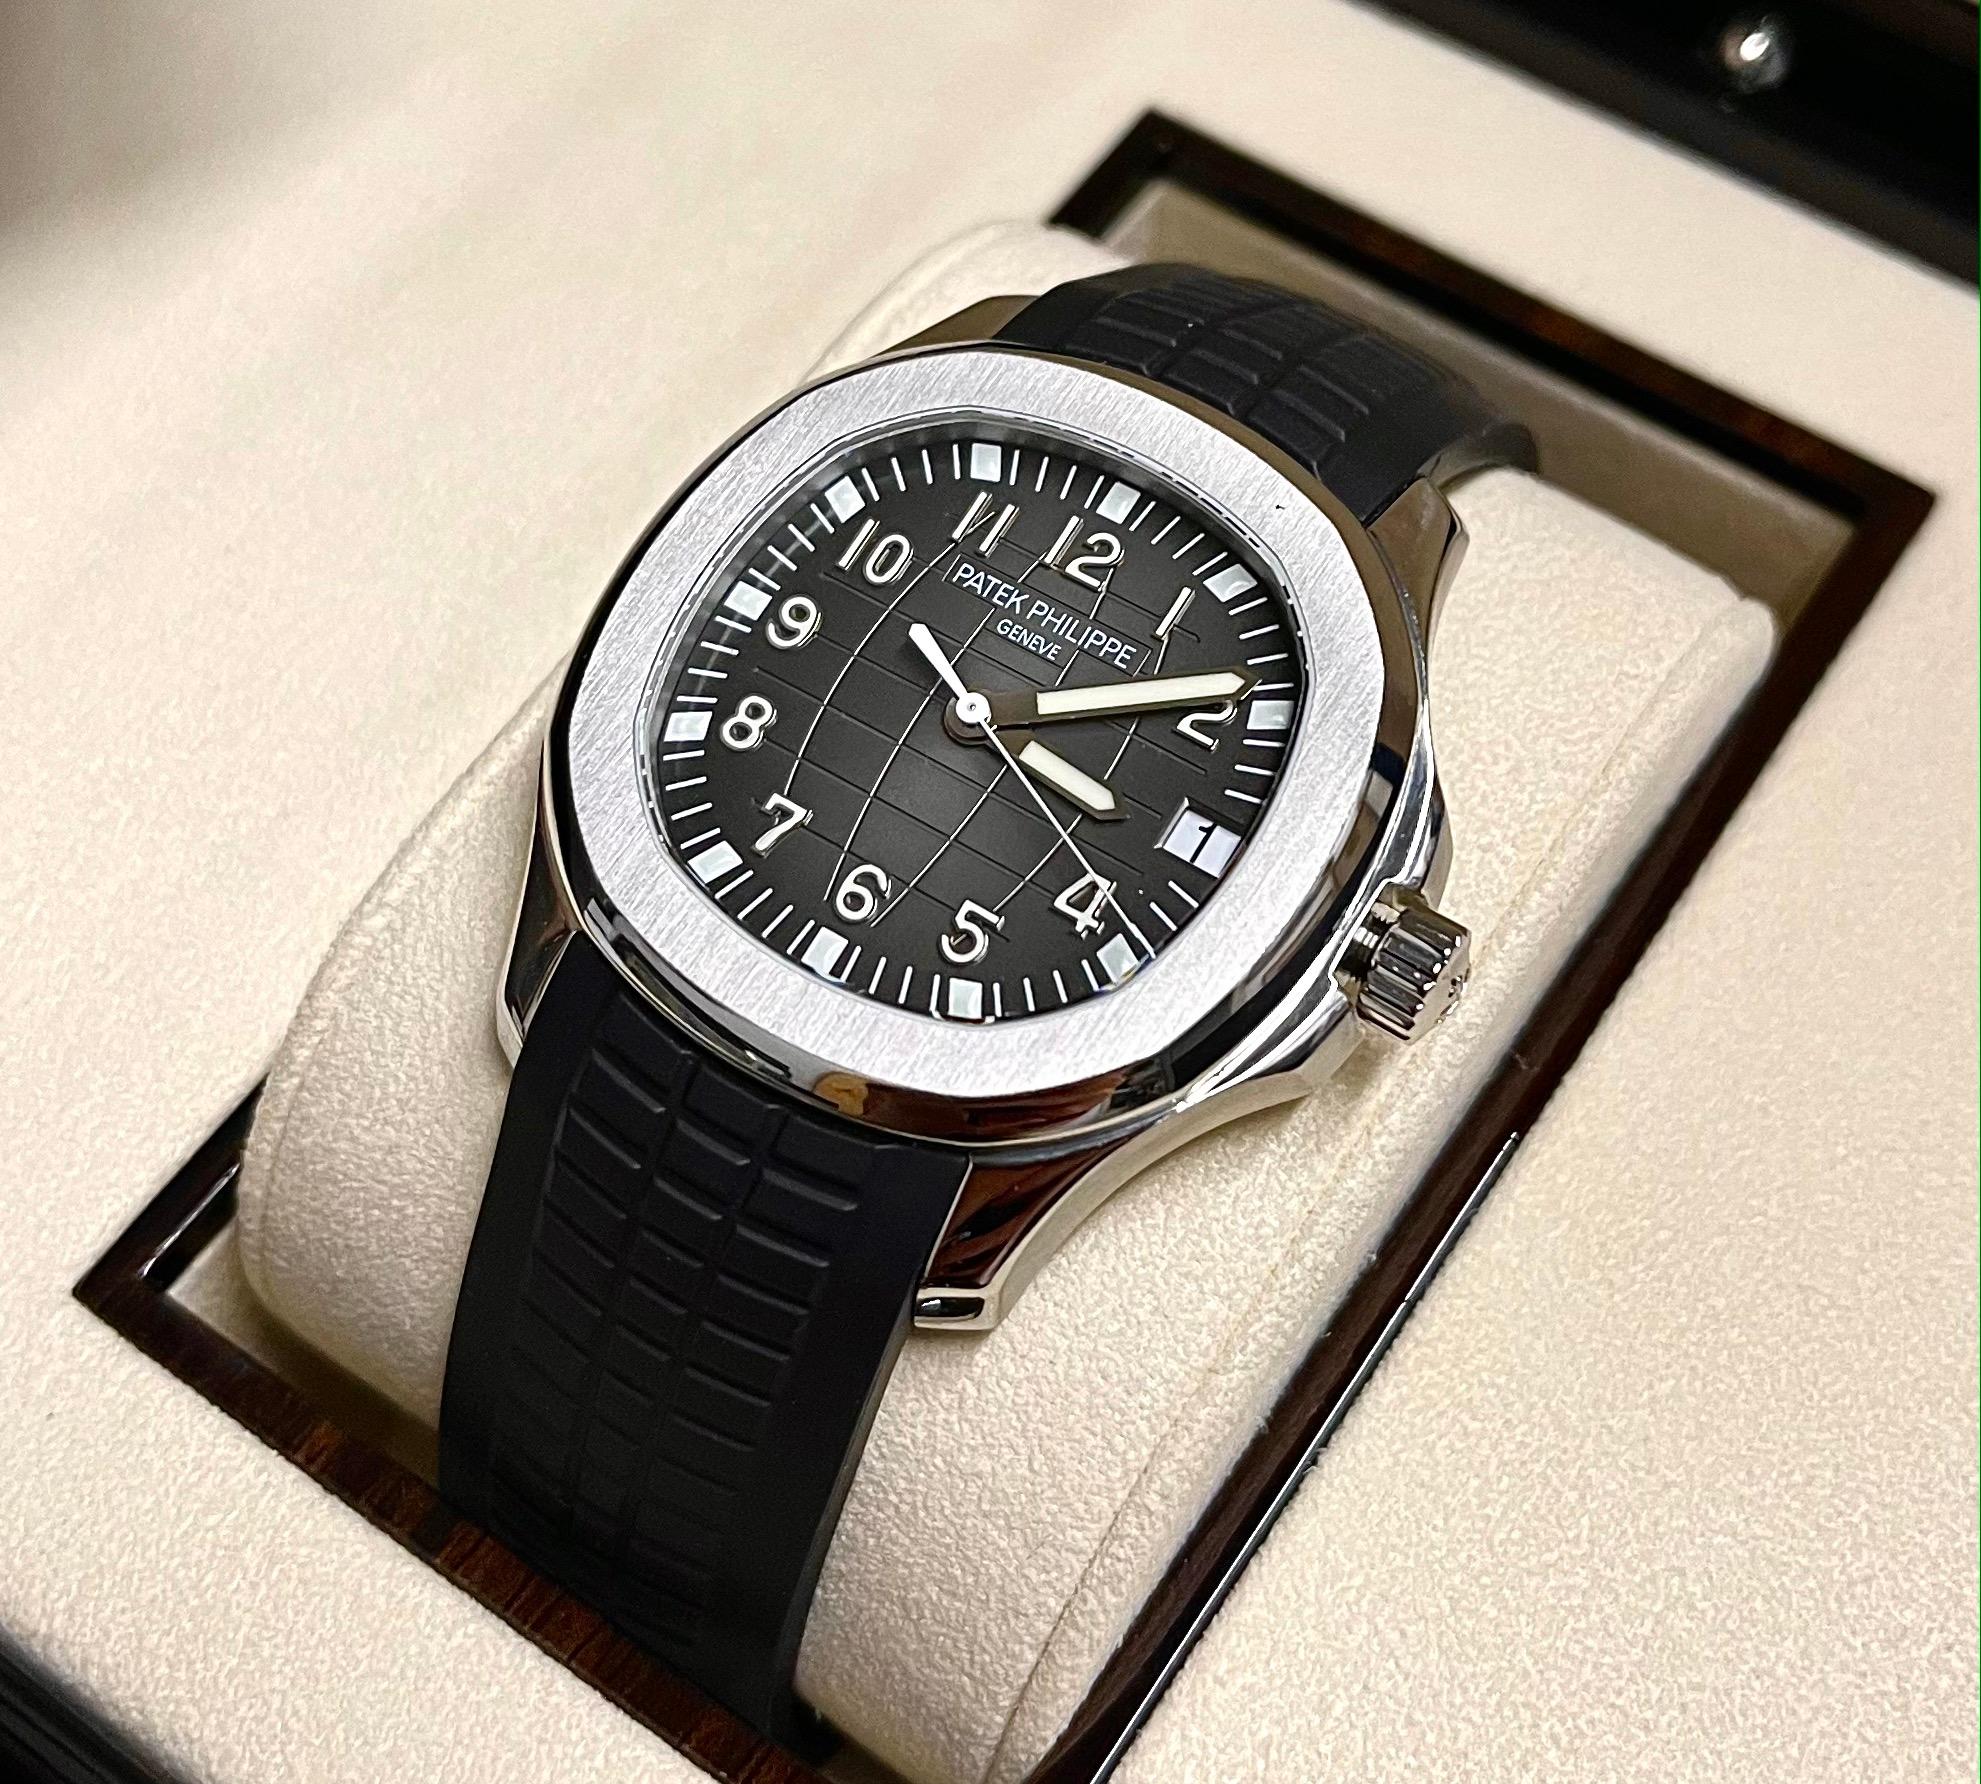 PATEK PHILIPPE REF # 5165_001 TIFFANY'S COBRANDED AQUANAUT AUTOMATIC WATCH

ITEM DESCRIPTION: 
One Patek Philippe Tiffany cobranded Aquanaut watch. The joy of wearing a piece of art on your wrist is within reach when you grab this incredible Patek